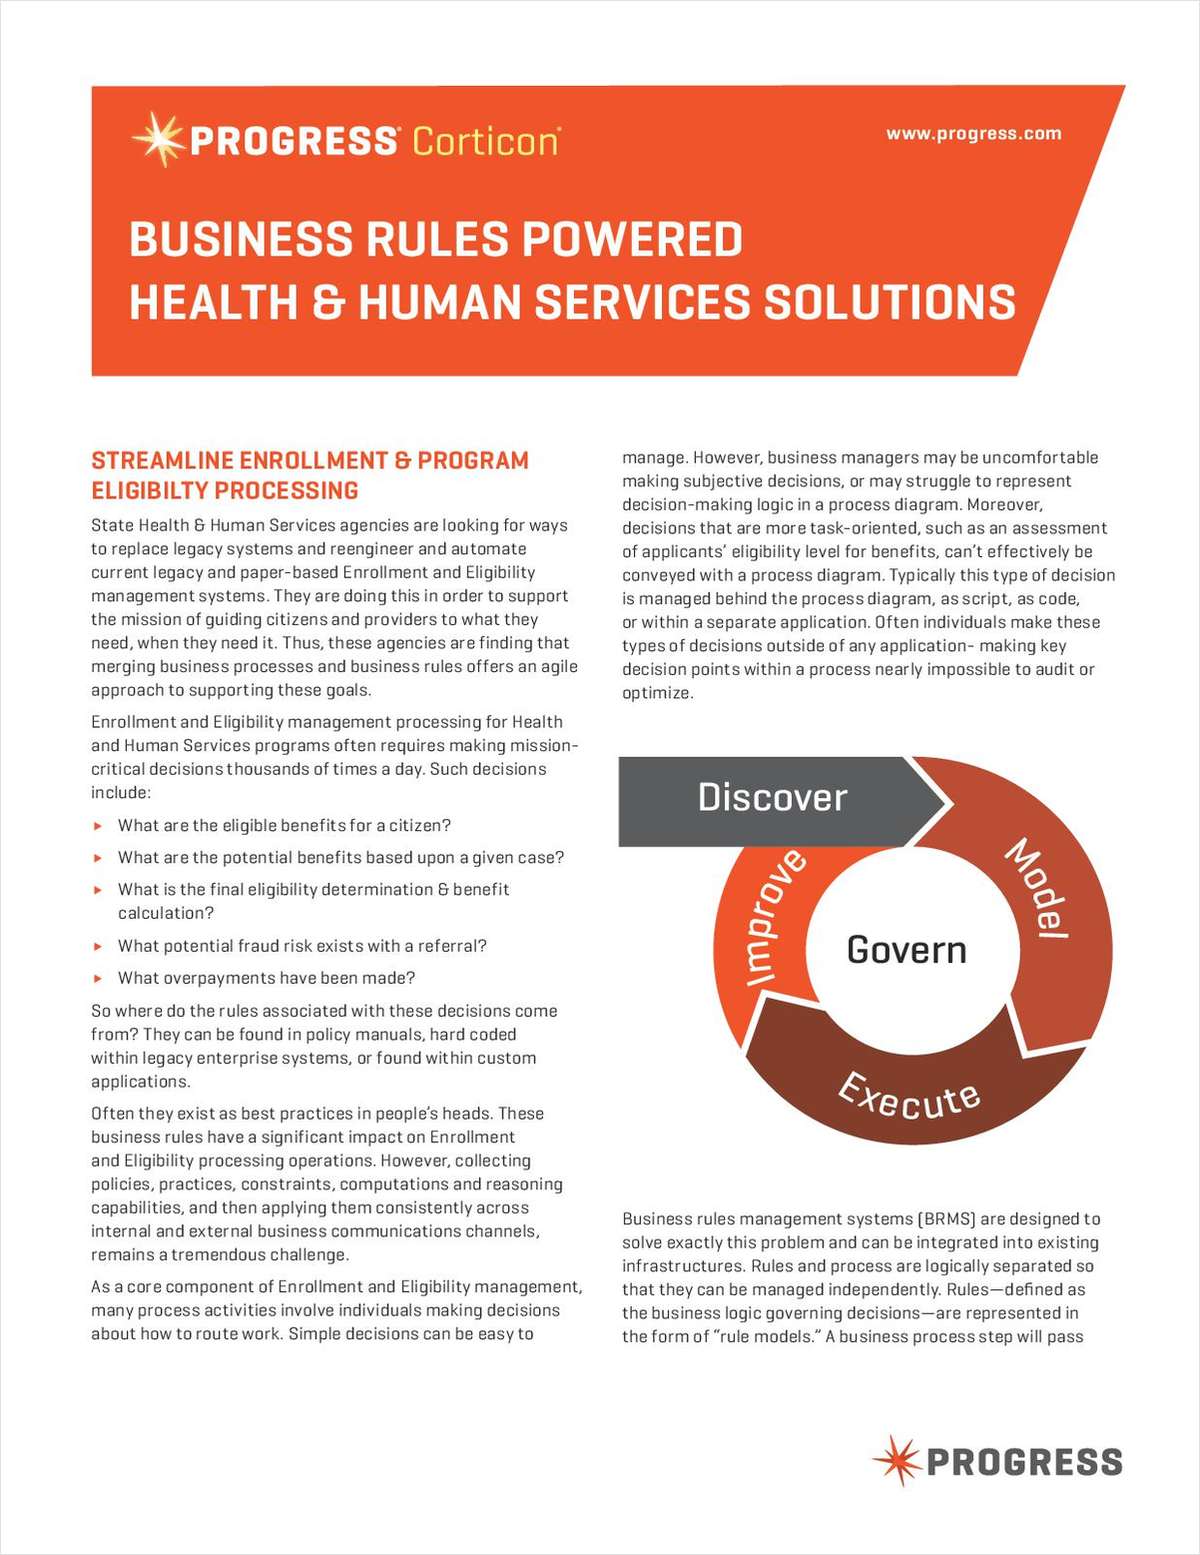 Business Rules Powered Health & Human Services Solutions